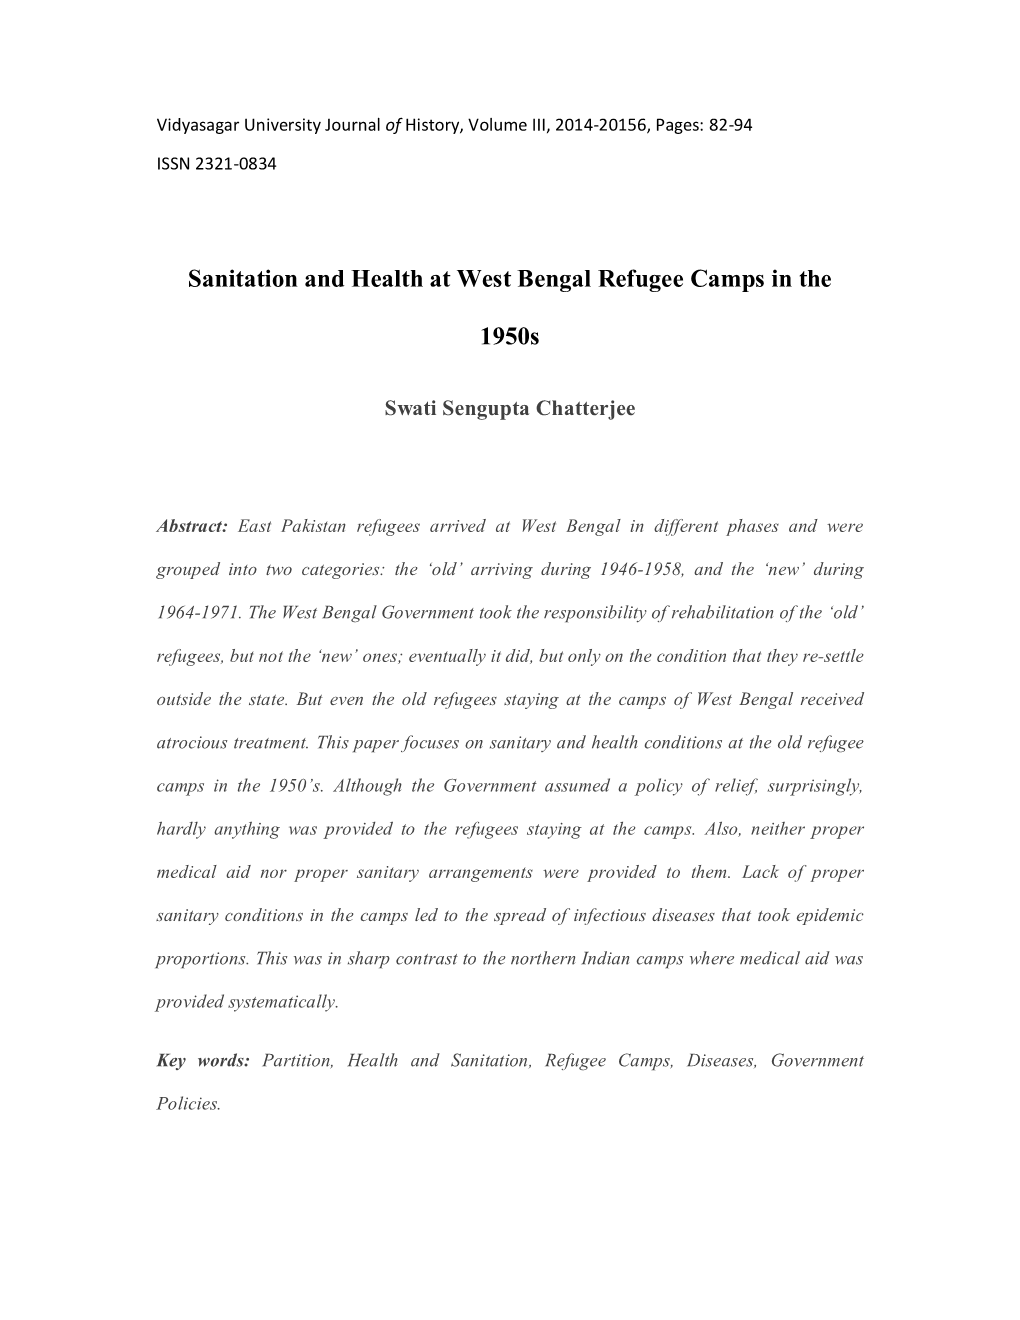 Sanitation and Health at West Bengal Refugee Camps in the 1950S